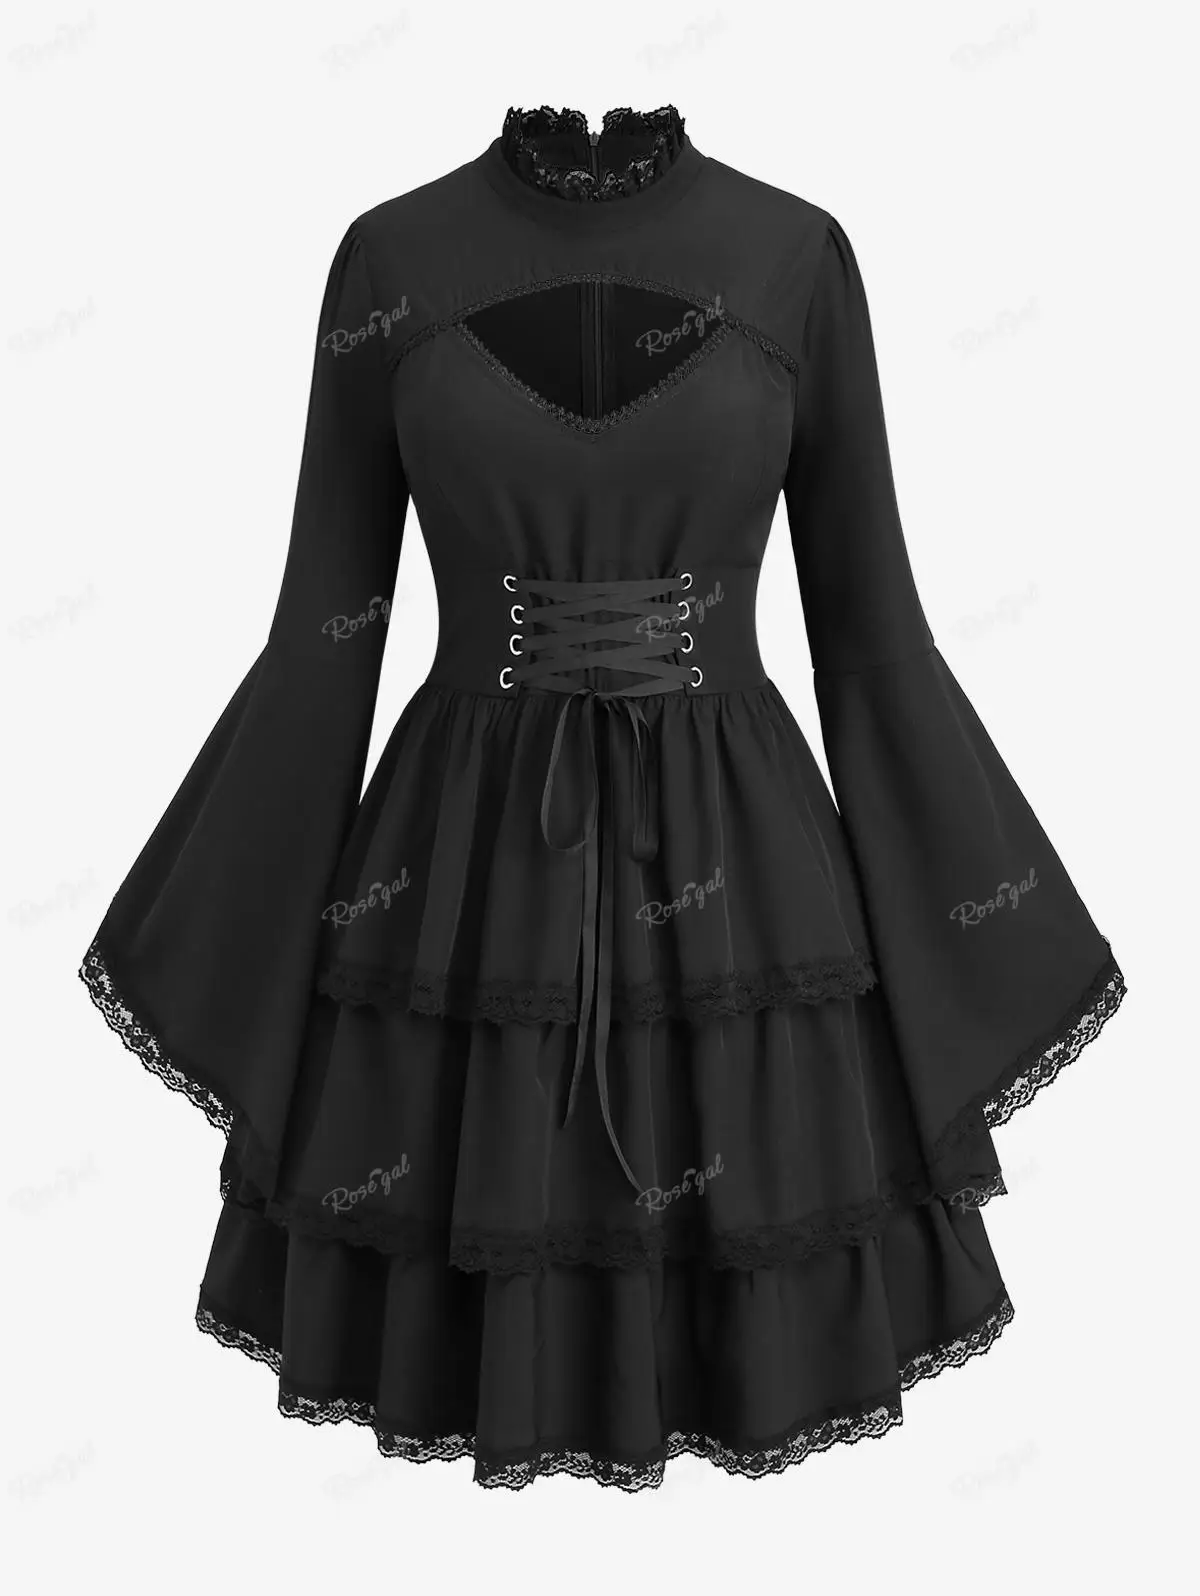 

ROSEGAL New Gothic Plus Size Dresses Lace-up Layered Floral Lace Trim Cutout Flare Sleeves Dress Black Ruffles Knee-Length Robe